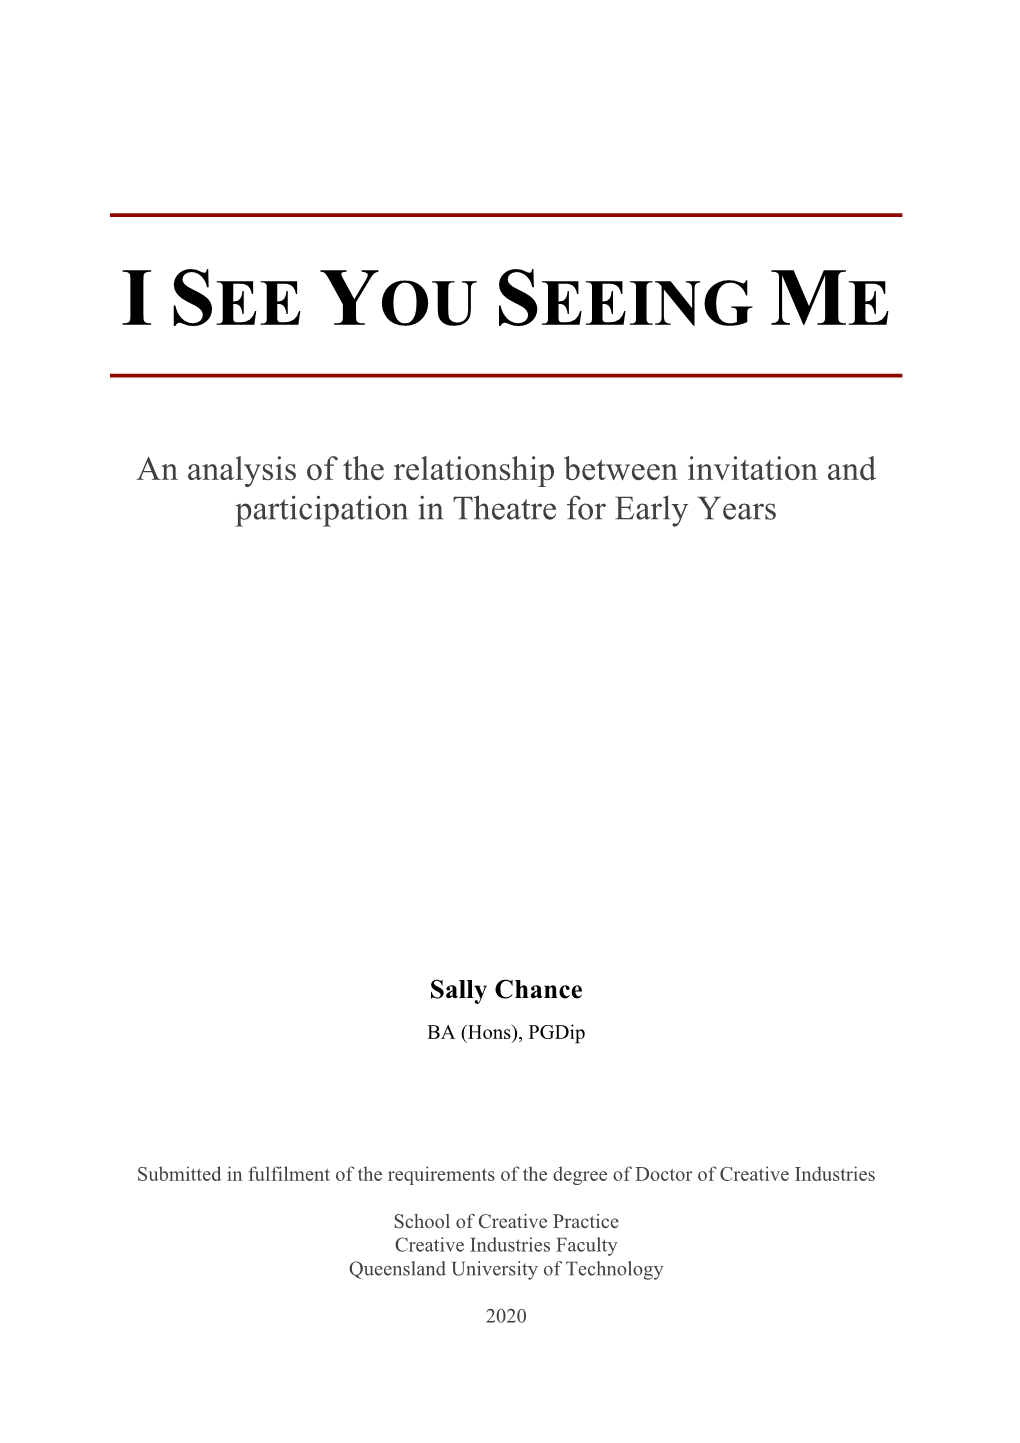 Sally Chance Thesis